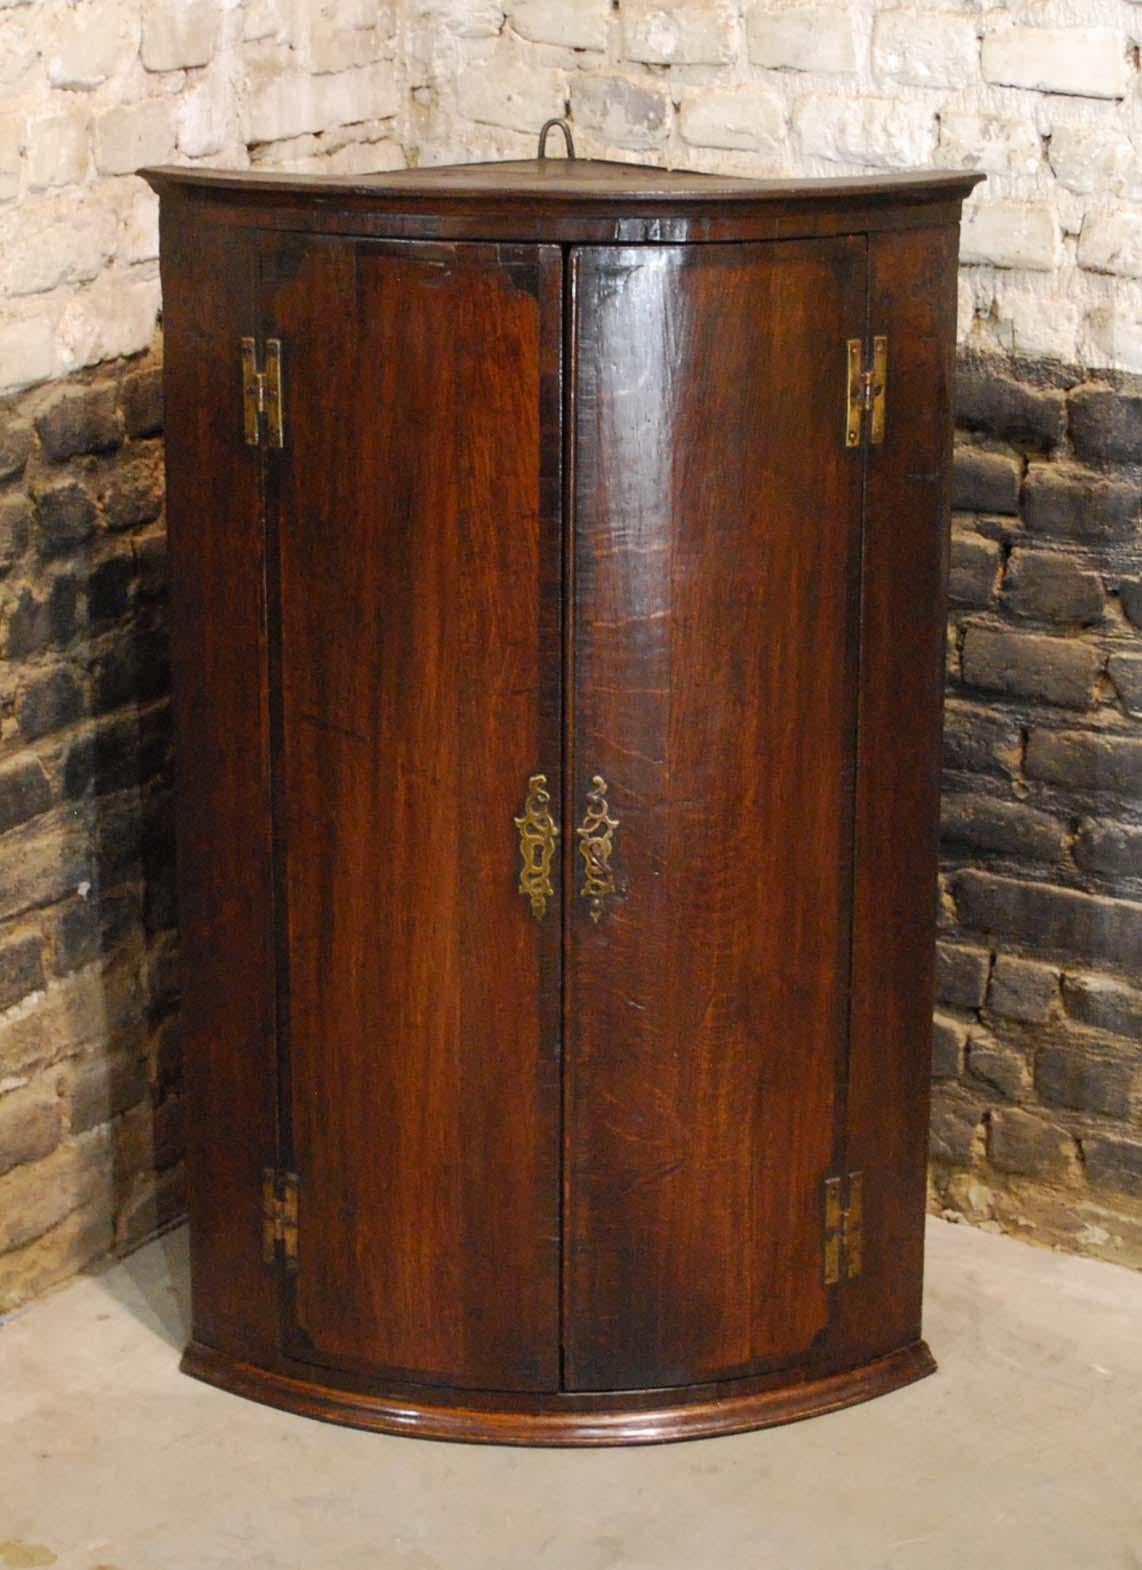 This elegant antique hanging corner cabinet was made in England circa 1860. 
It is made in solid oak with crossband mahogany veneer surrounding both bow fronted doors. It’s interior features three fixed shelves and has a warm dark brown painted